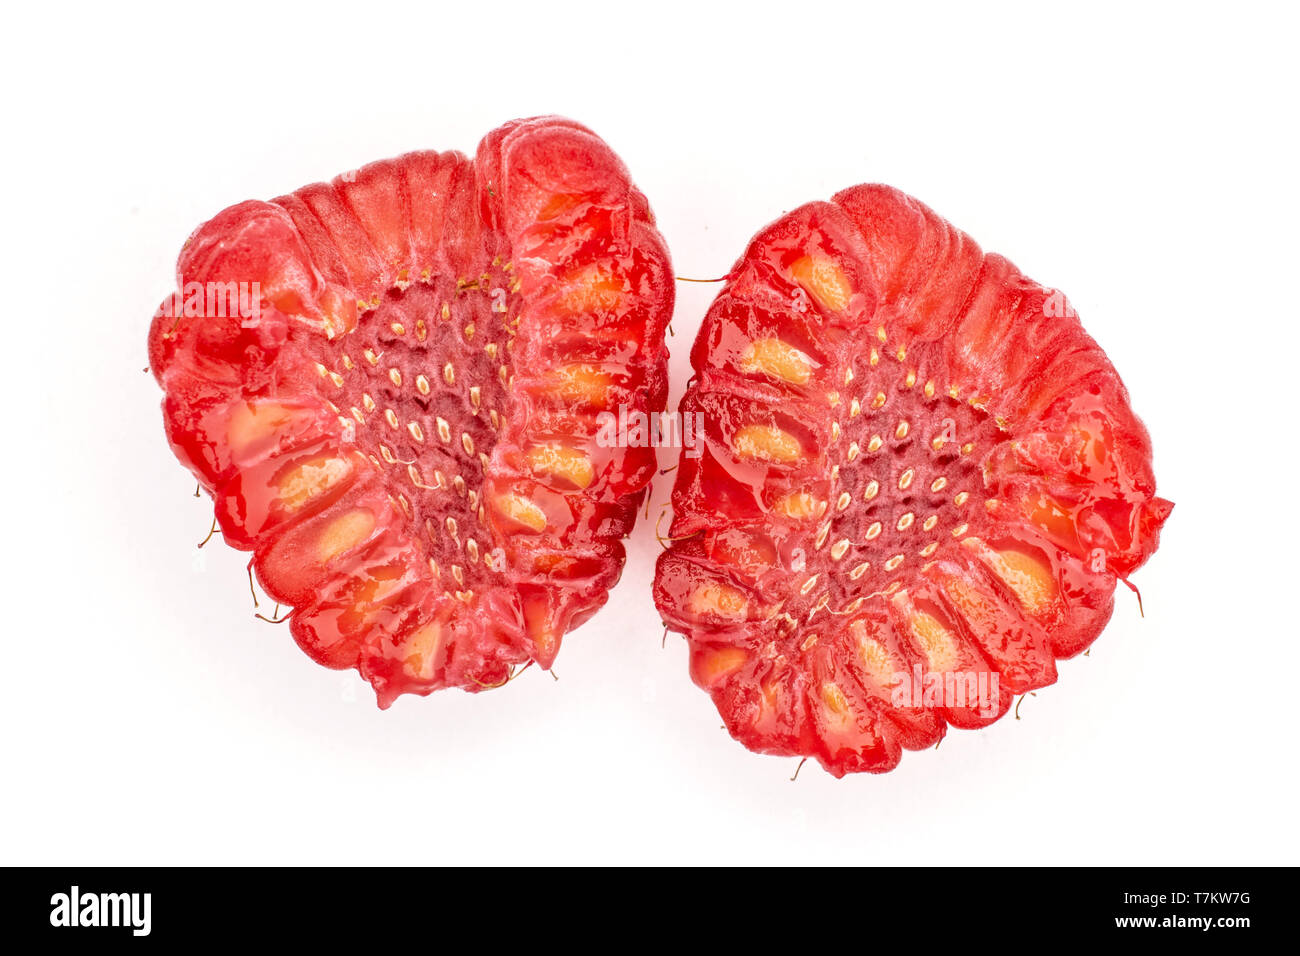 Group of two halves of fresh red raspberry cross section flatlay isolated on white background Stock Photo